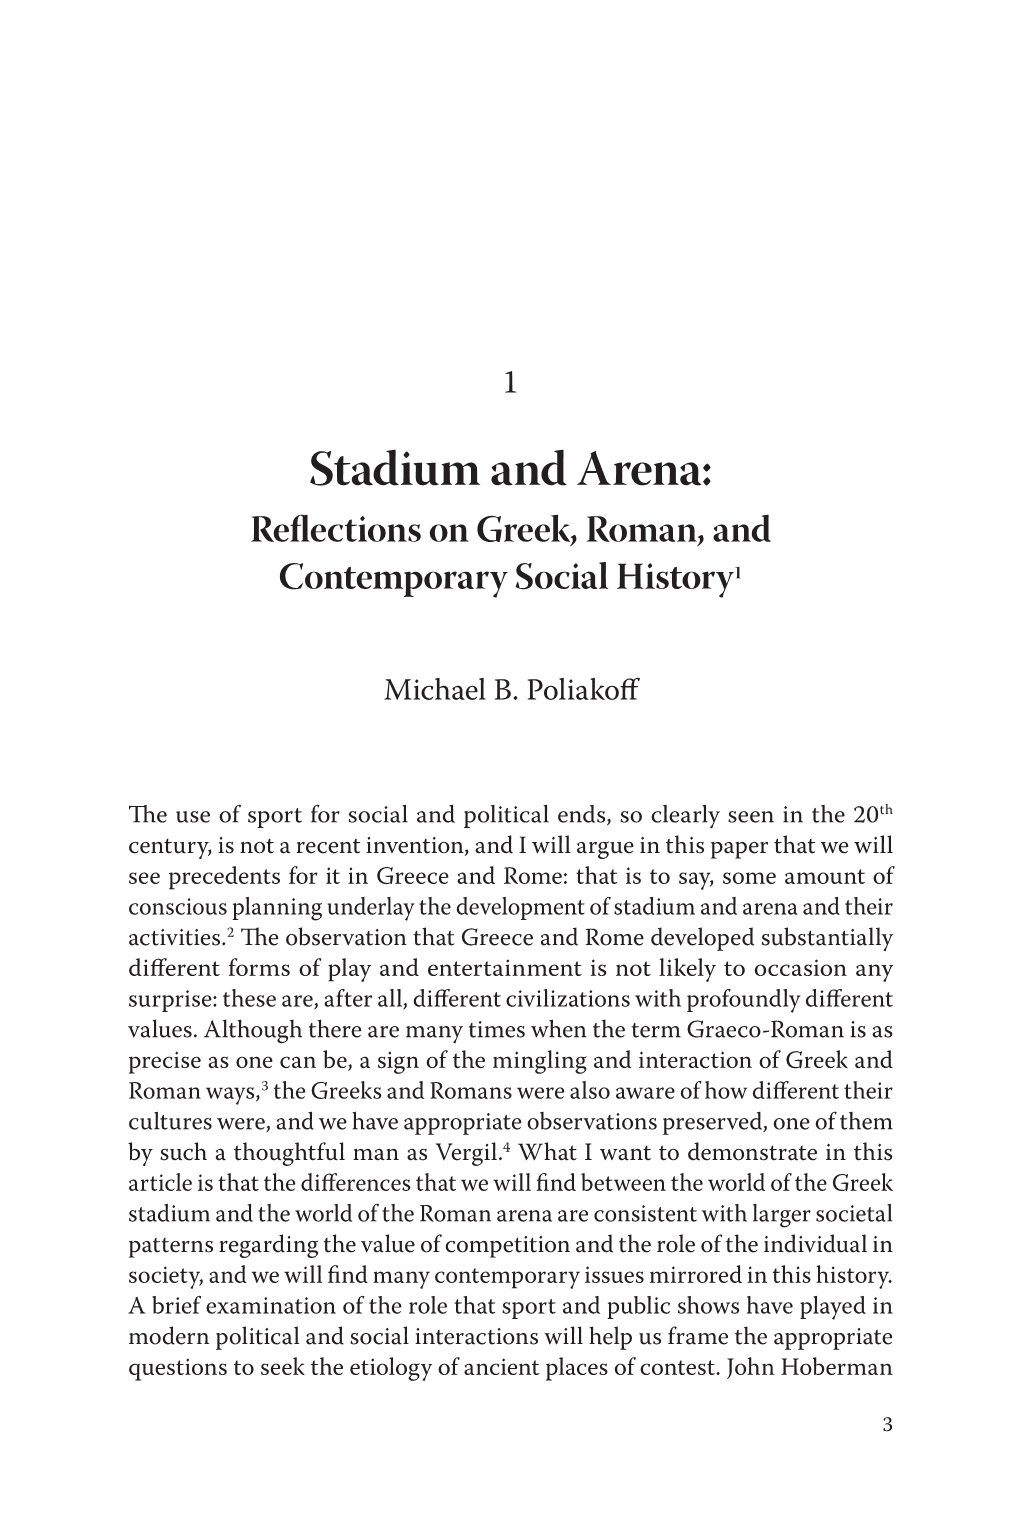 Stadium and Arena: Reflections on Greek, Roman, and Contemporary Social History1